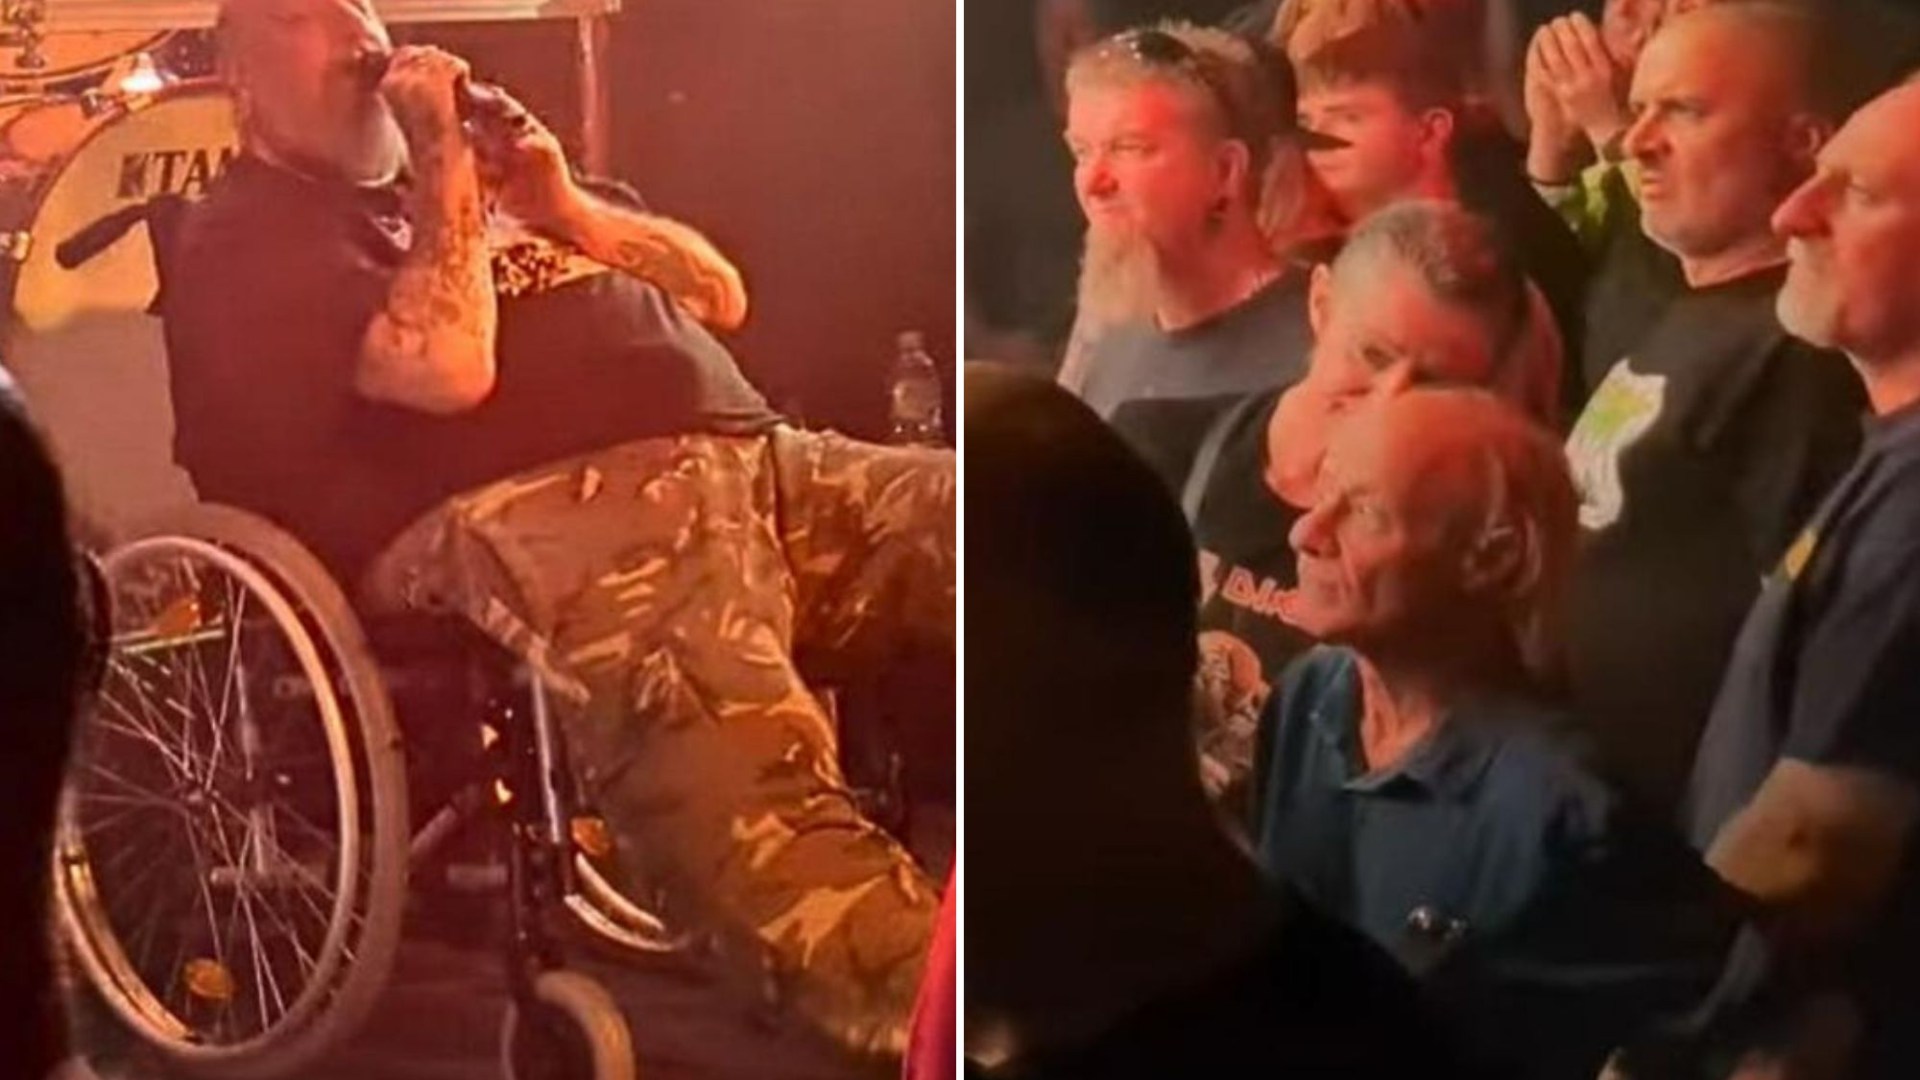 Epic Rock Legend Threatens to Send Audience Member Home in an Ambulance at World’s Slowest Car Crash Gig